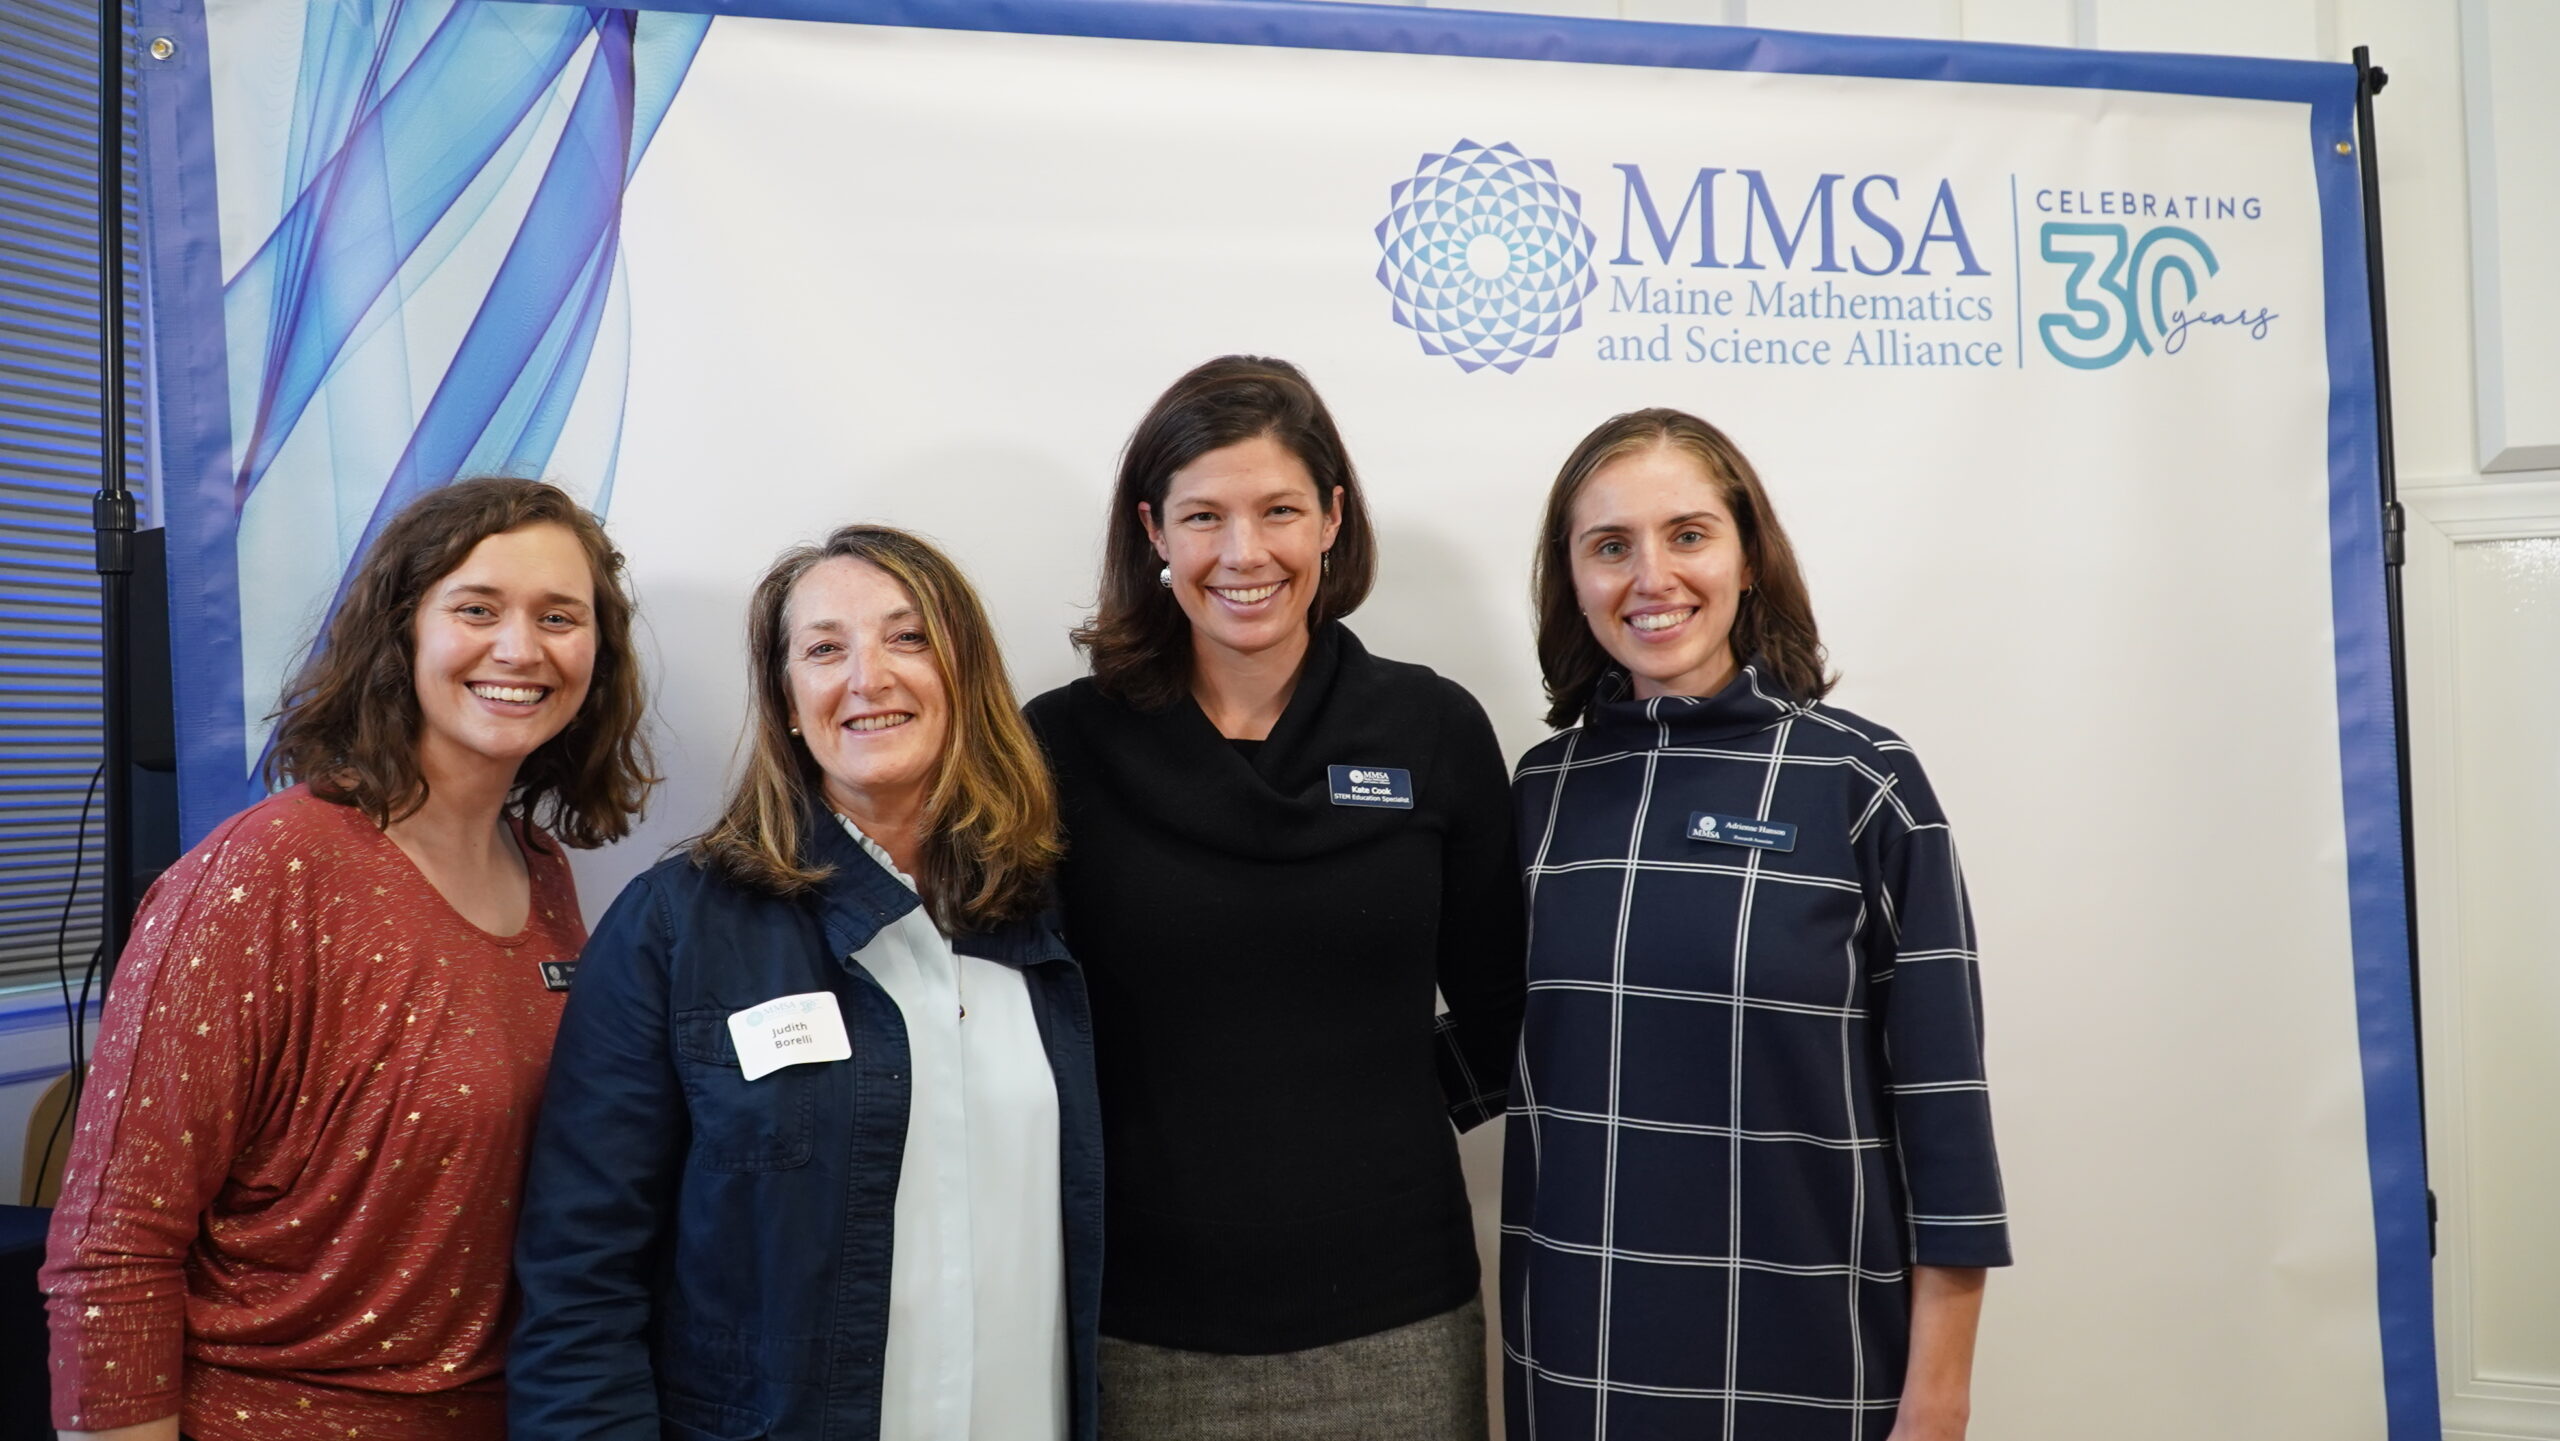 Four MMSA staff pose in front of a photo banner.